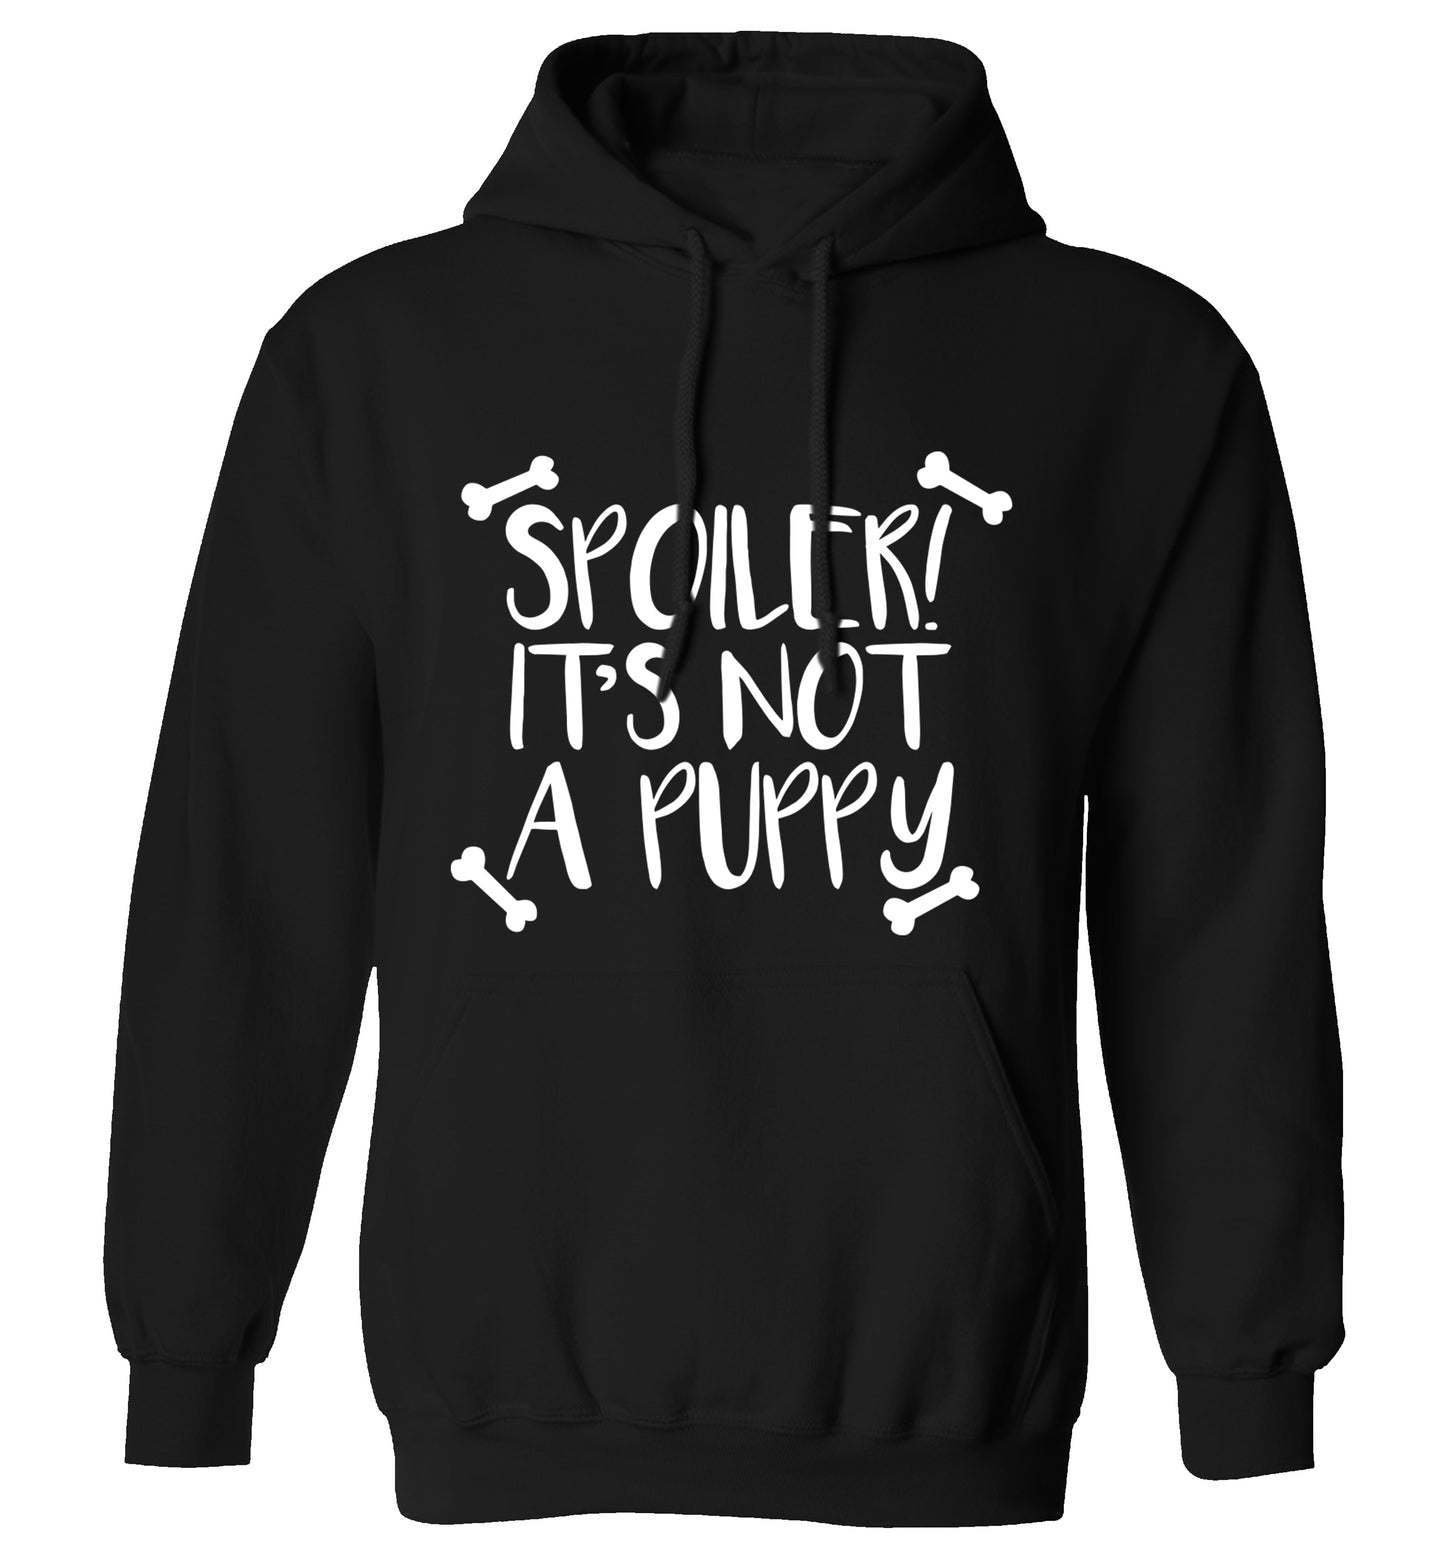 Spoiler it's not a puppy adults unisex black hoodie 2XL